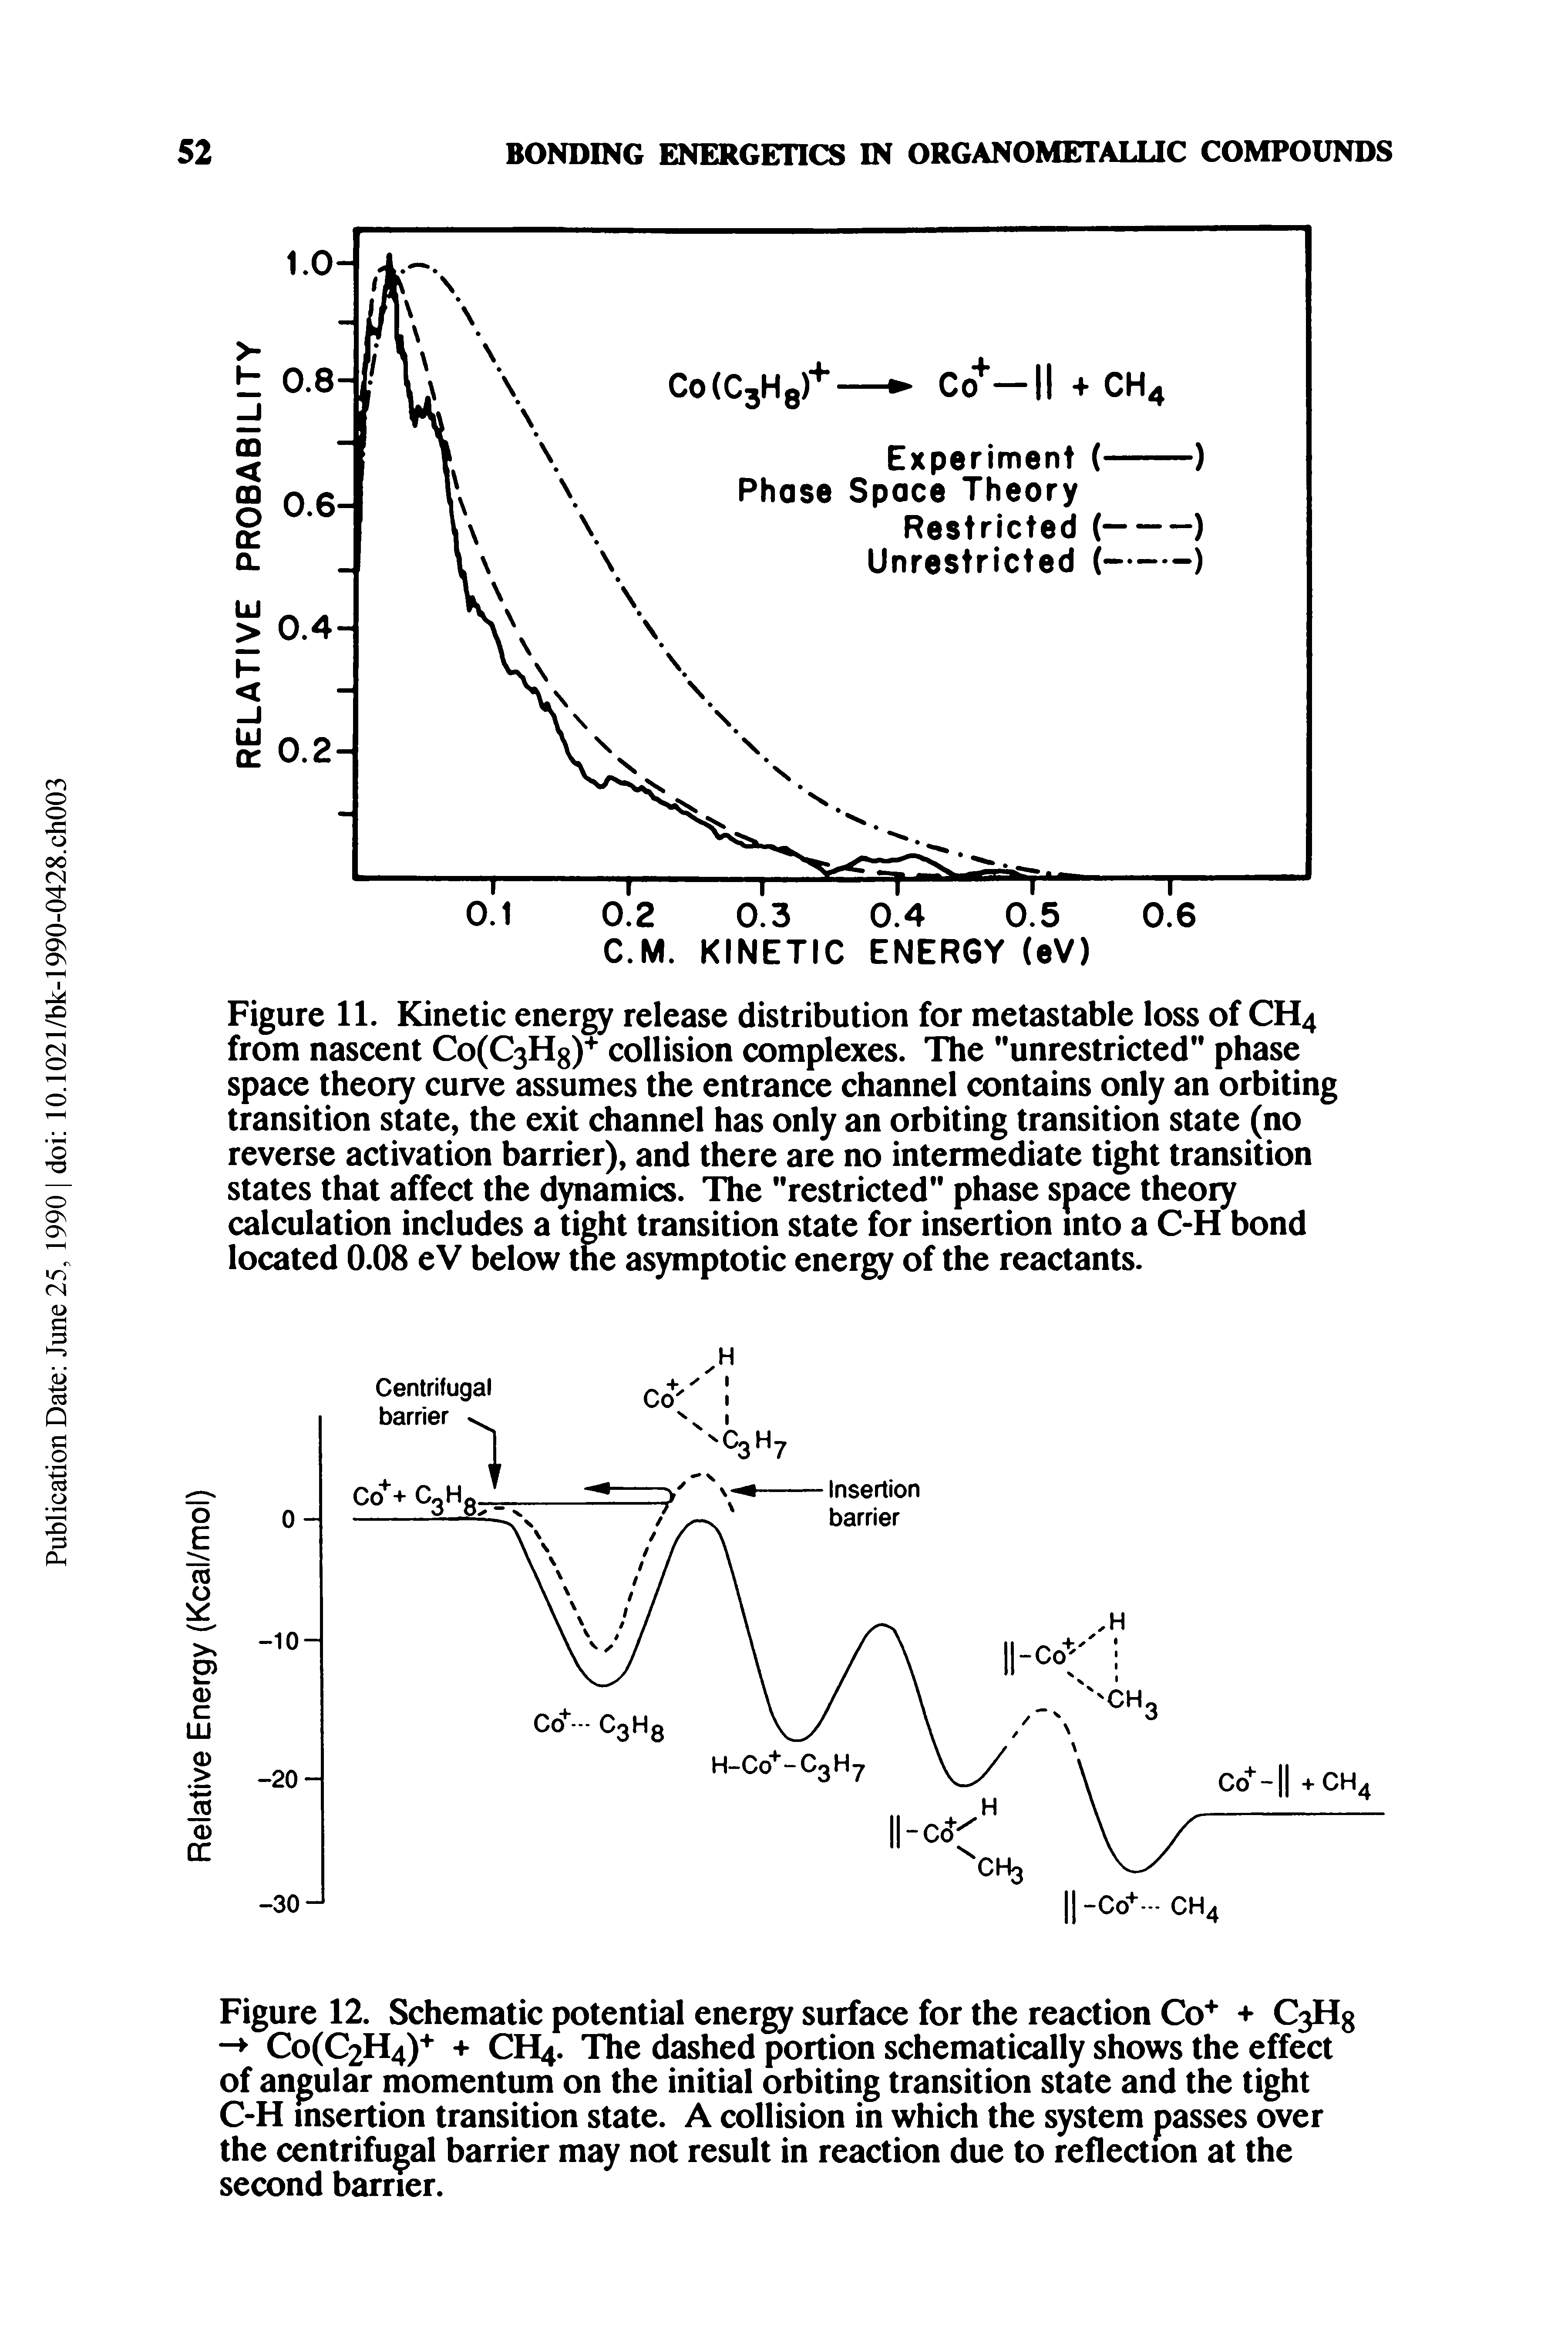 Figure 11. Kinetic energy release distribution for metastable loss of CH4 from nascent Co(C3Hg)+ collision complexes. The "unrestricted" phase space theory curve assumes the entrance channel contains only an orbiting transition state, the exit channel has only an orbiting transition state (no reverse activation barrier), and there are no intermediate tight transition states that affect the dynamics. The "restricted" phase space theory calculation includes a tight transition state for insertion into a C-H bond located 0.08 eV below the asymptotic energy of the reactants.